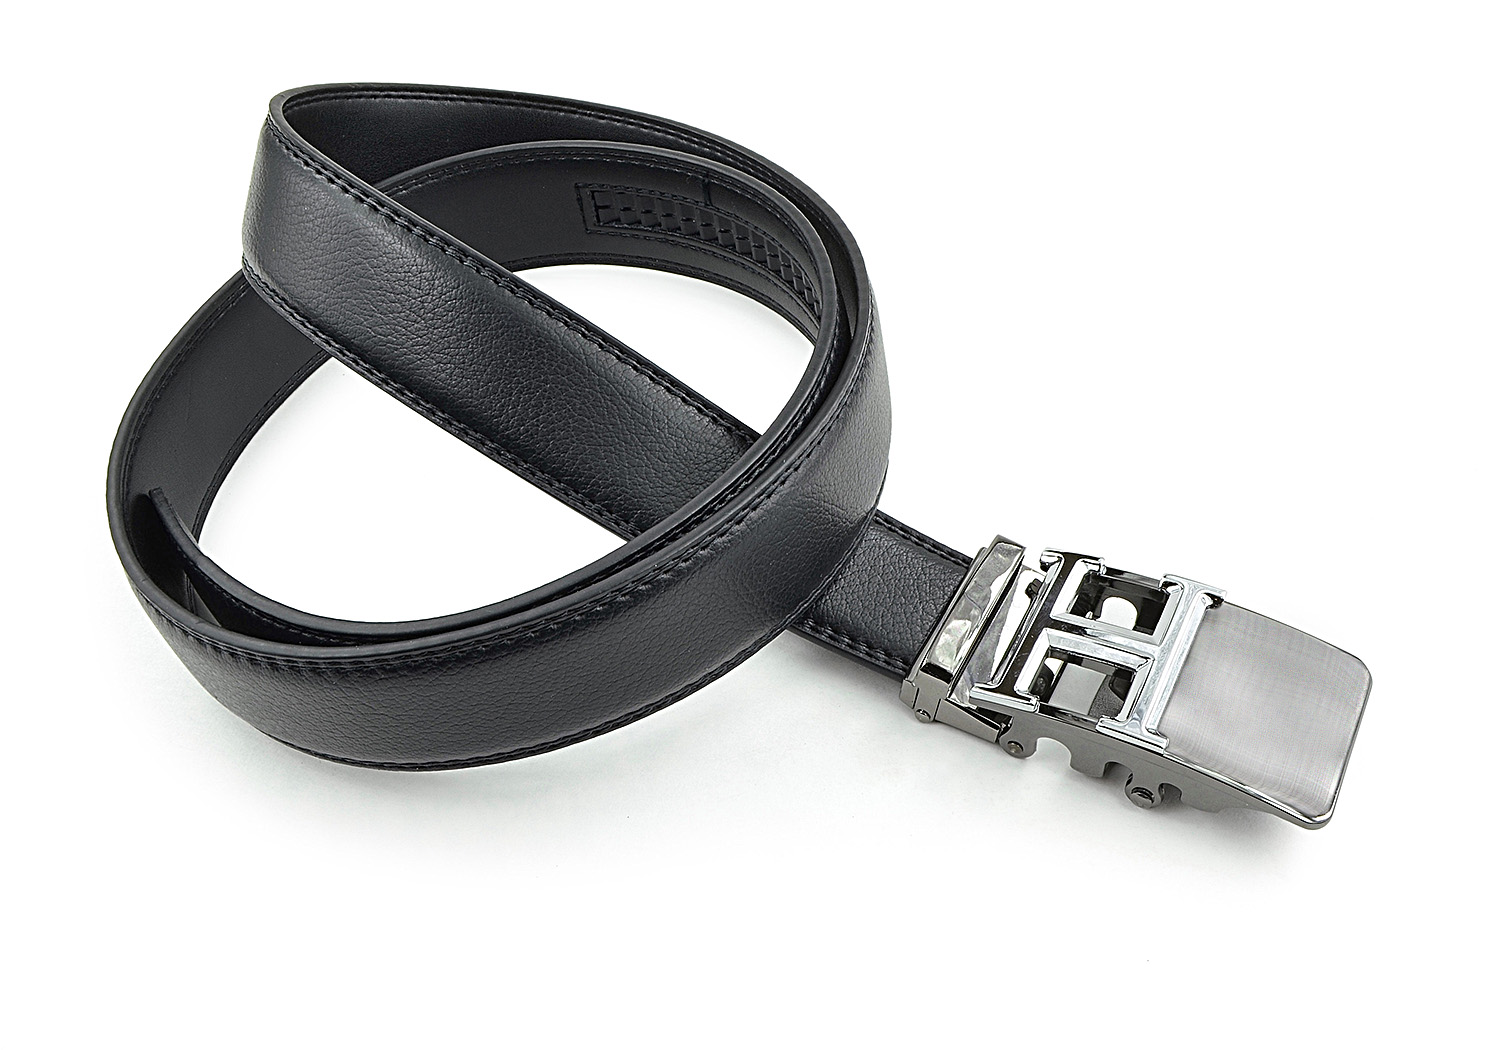 Mens Leather Belt with Automatic Slide Buckle - Black PU Leather Ratchet Belt by Moda Di Raza - Black One Size